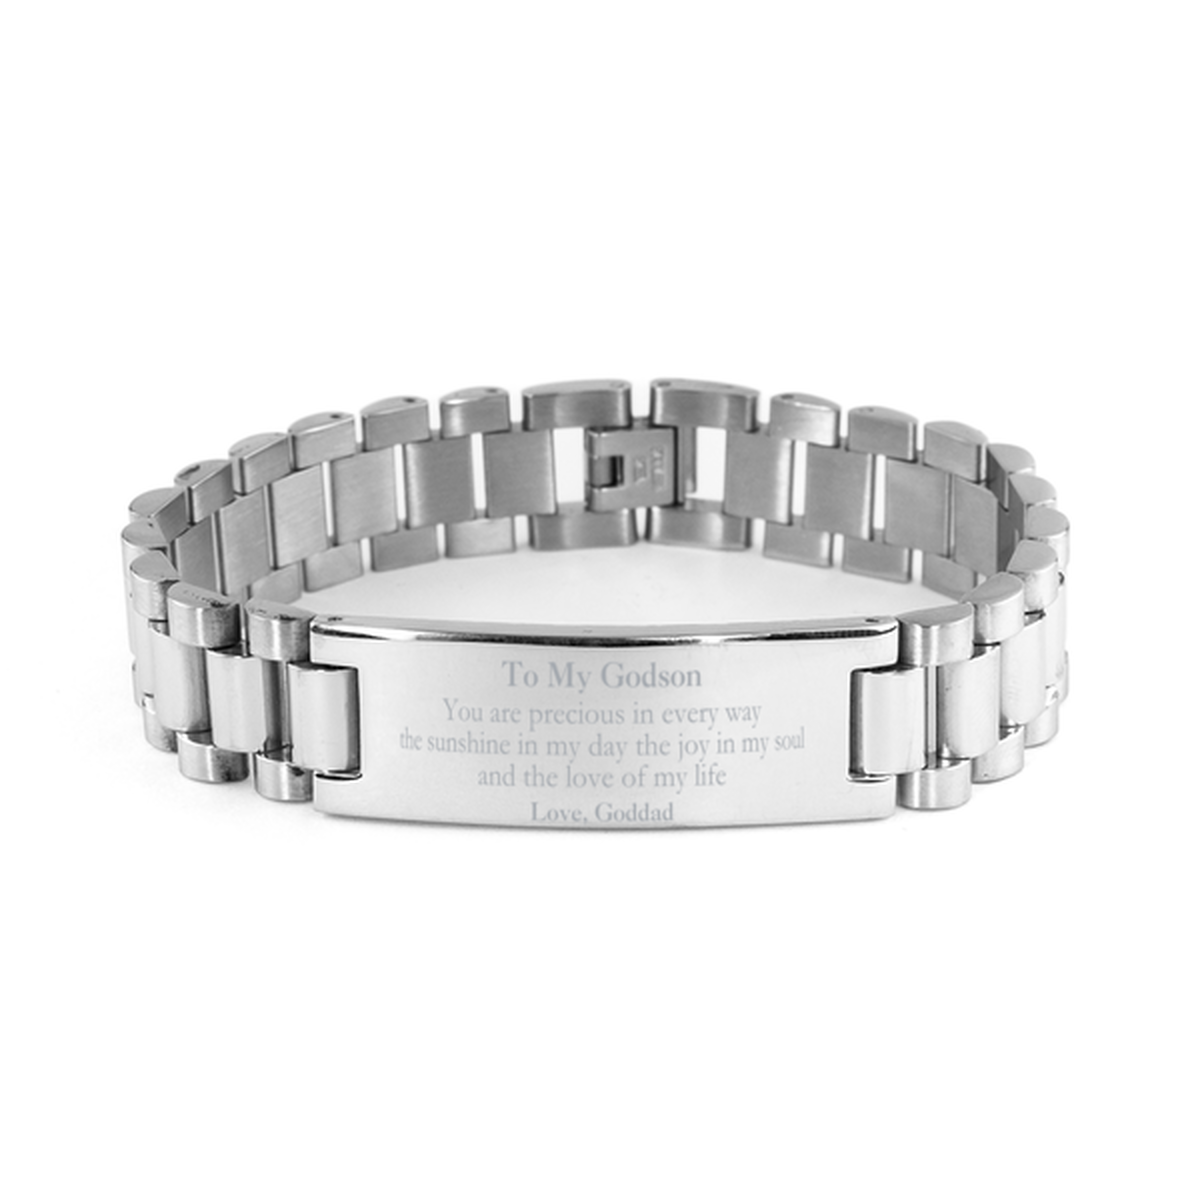 Graduation Gifts for Godson Ladder Stainless Steel Bracelet Present from Goddad, Christmas Godson Birthday Gifts Godson You are precious in every way the sunshine in my day. Love, Goddad